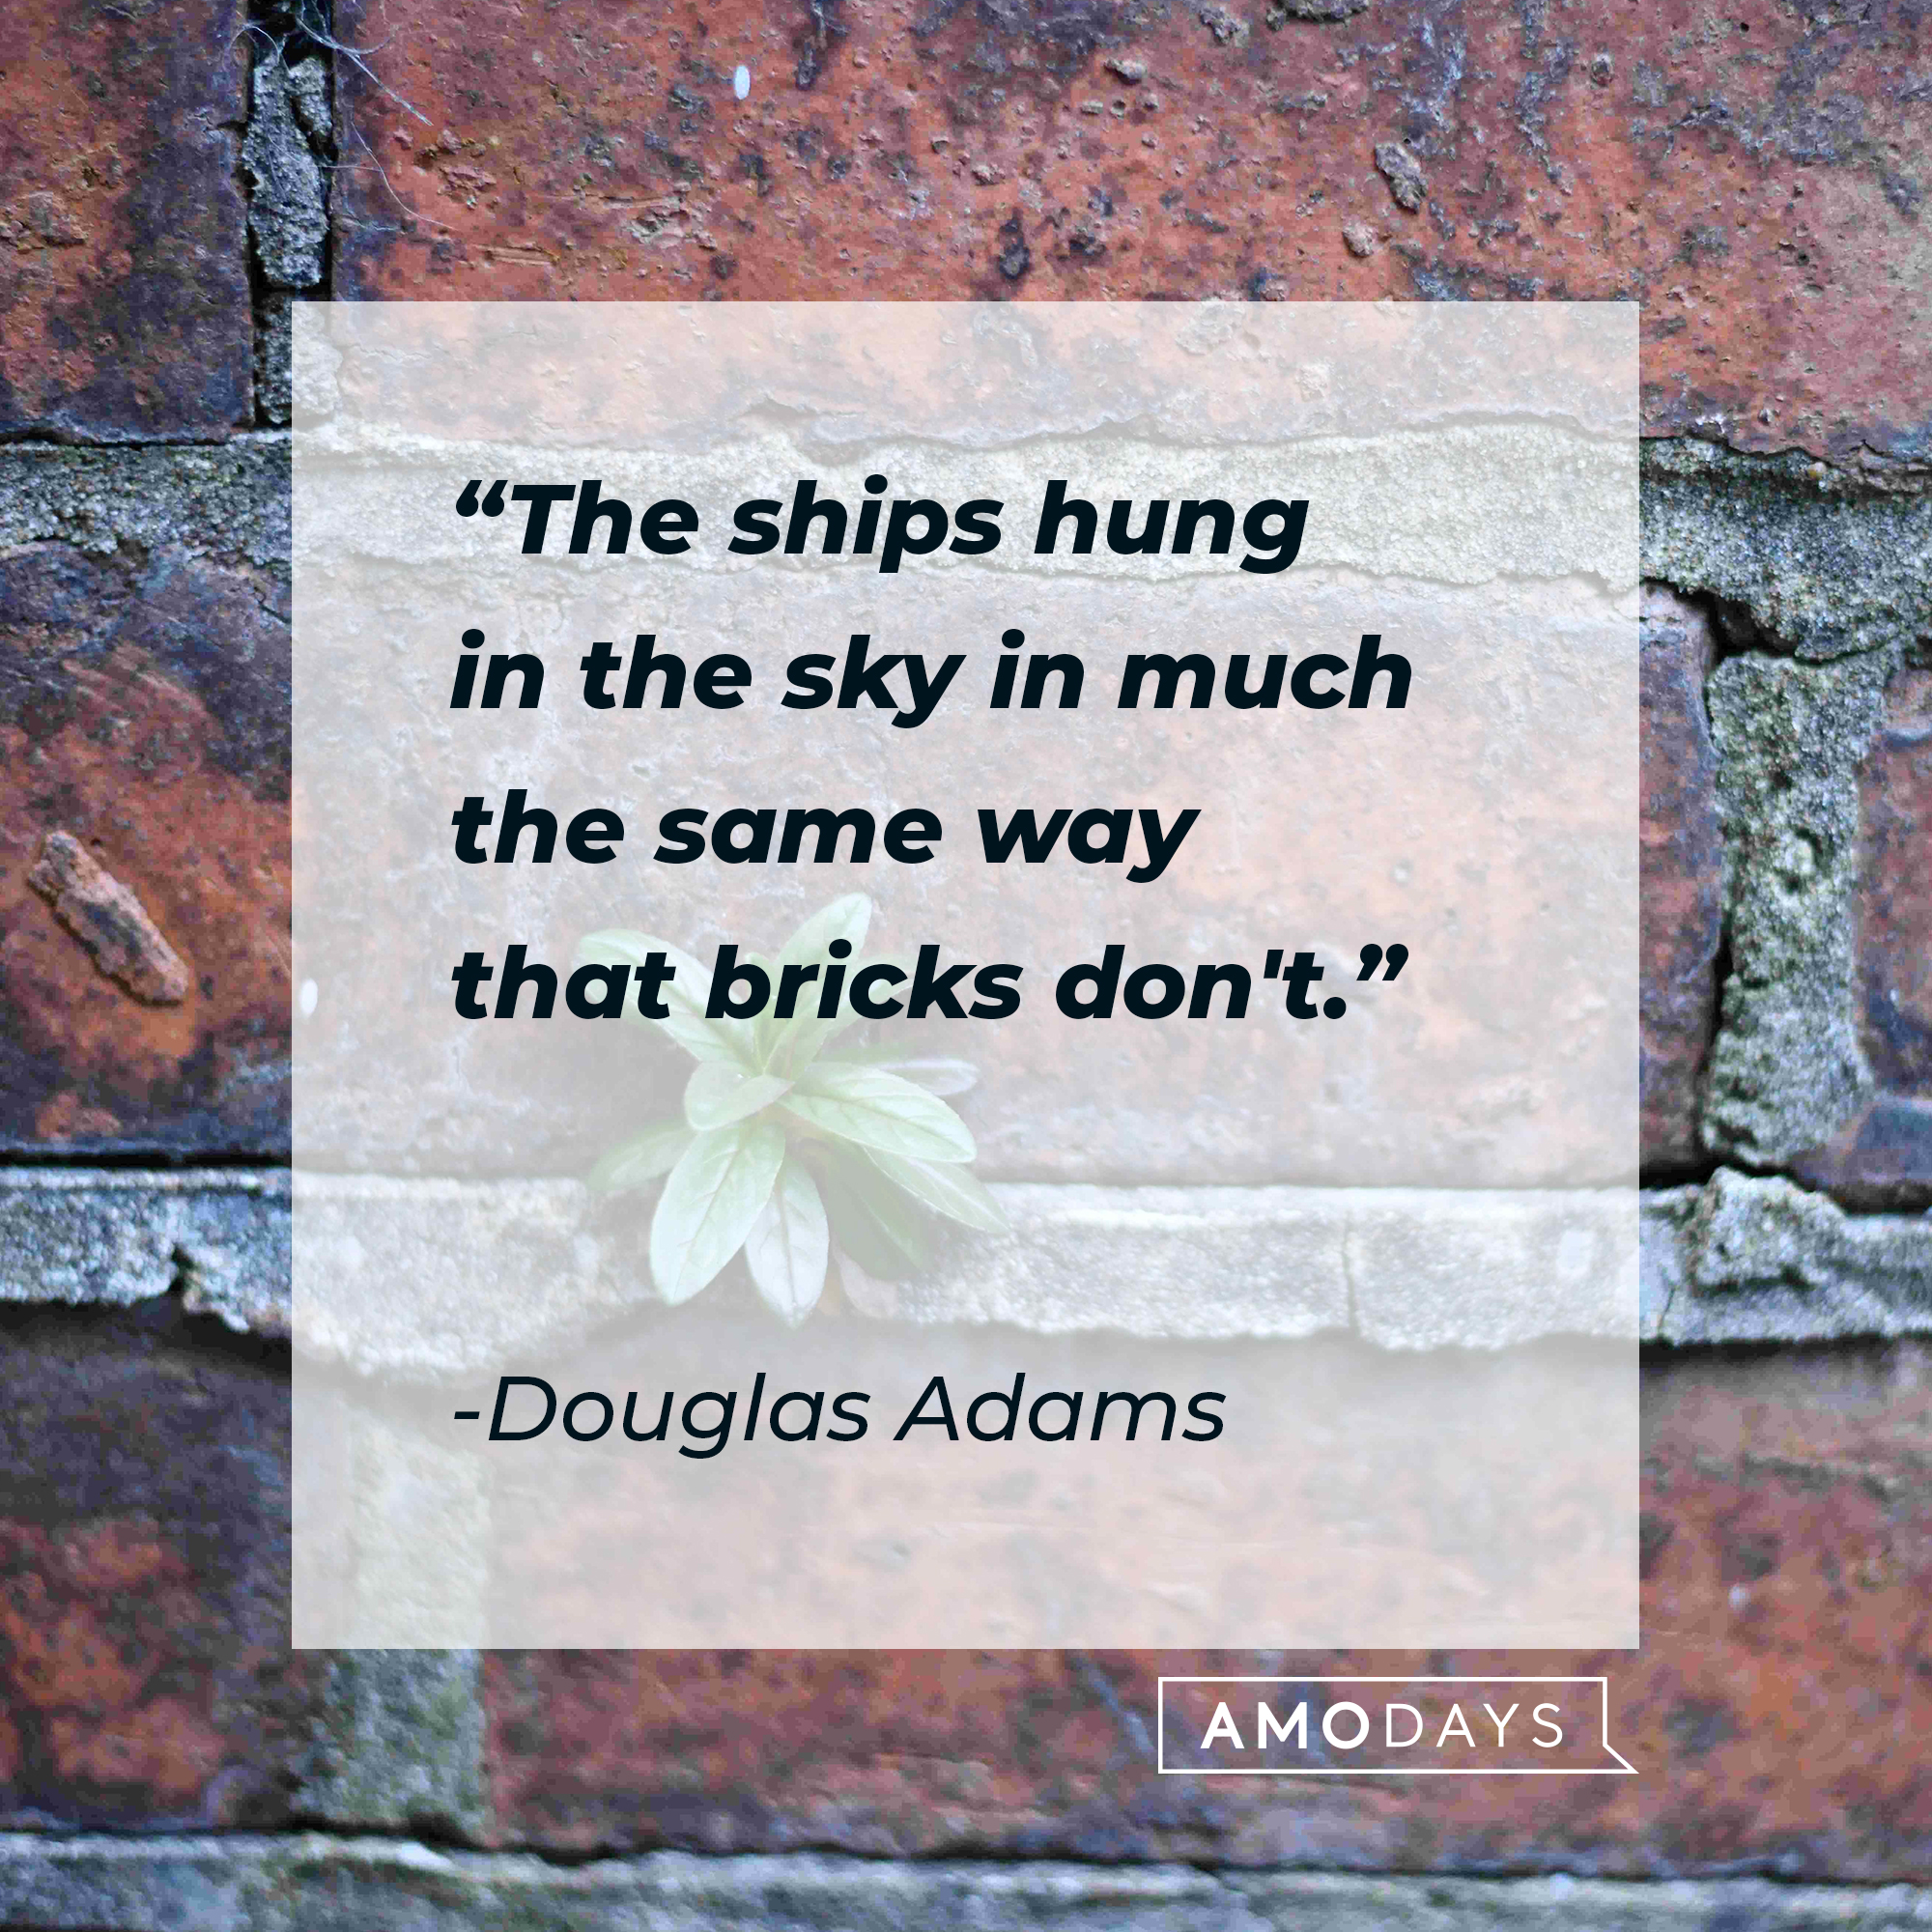 Douglas Adams' quote: "The ships hung in the sky in much the same way that bricks don't." | Source: Unsplash